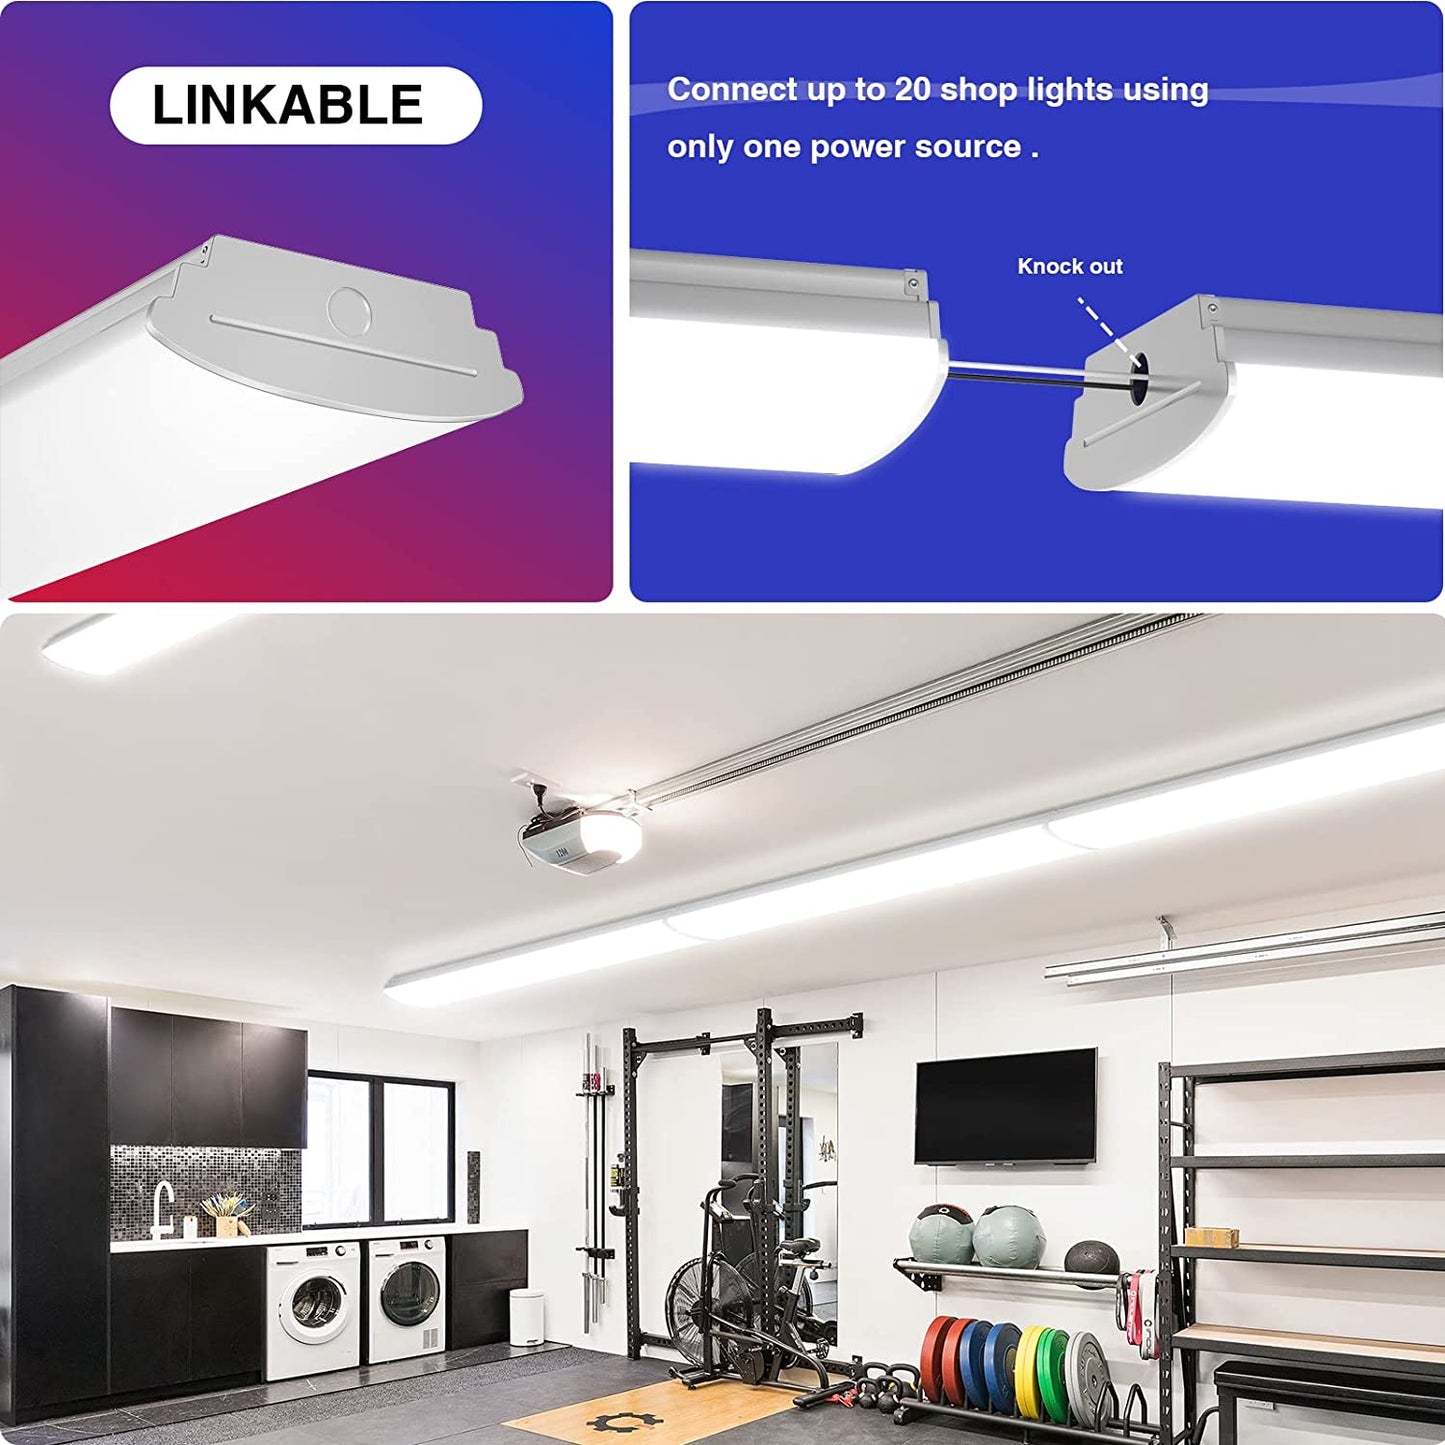 AntLux 4FT LED Wraparound Light Fixtures 4800LM, 4000K Neutral White 4 Foot LED Light, 40W(100W Eqv.) Flush Mount Integrated Linear Garage Shop Ceiling Lights for Laundry Room, Fluorescent Replacement